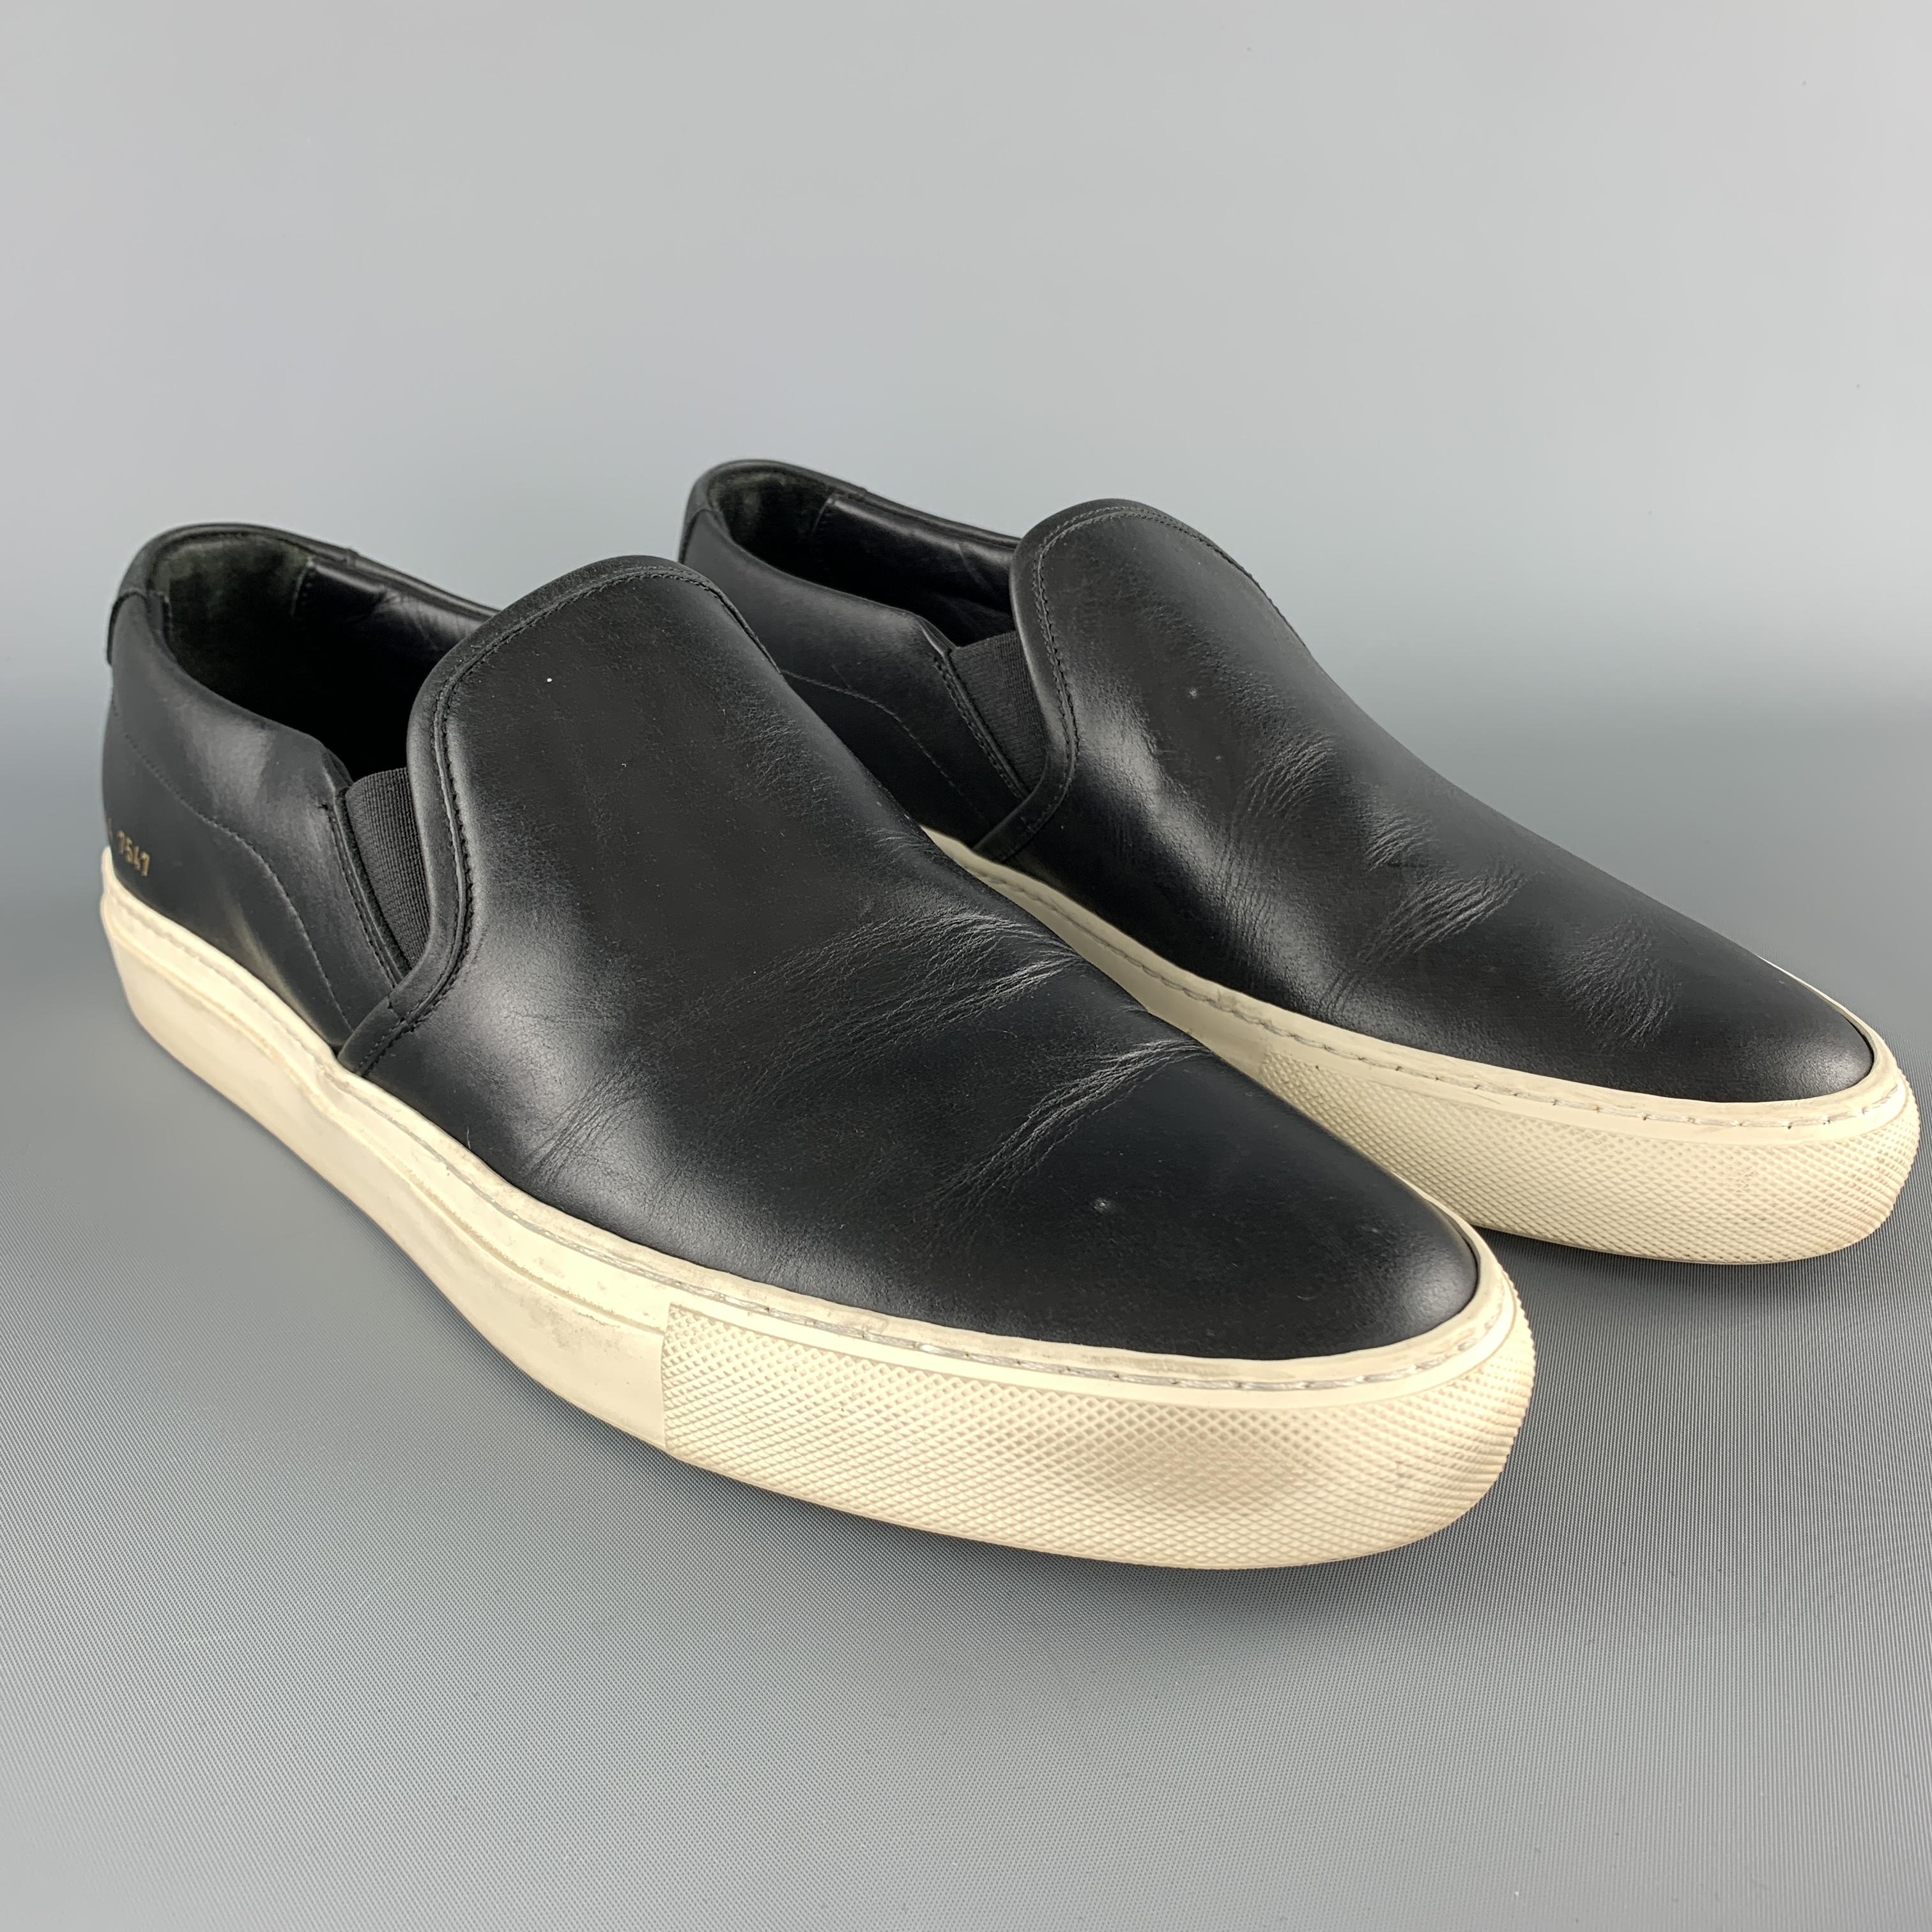 COMMON PROJECTS low top sneakers come in smooth leather with a white rubber sole. With box.  Made in Italy.

Good Pre-Owned Condition.
Marked: IT 44

Outsole: 12.25 x 4 in.